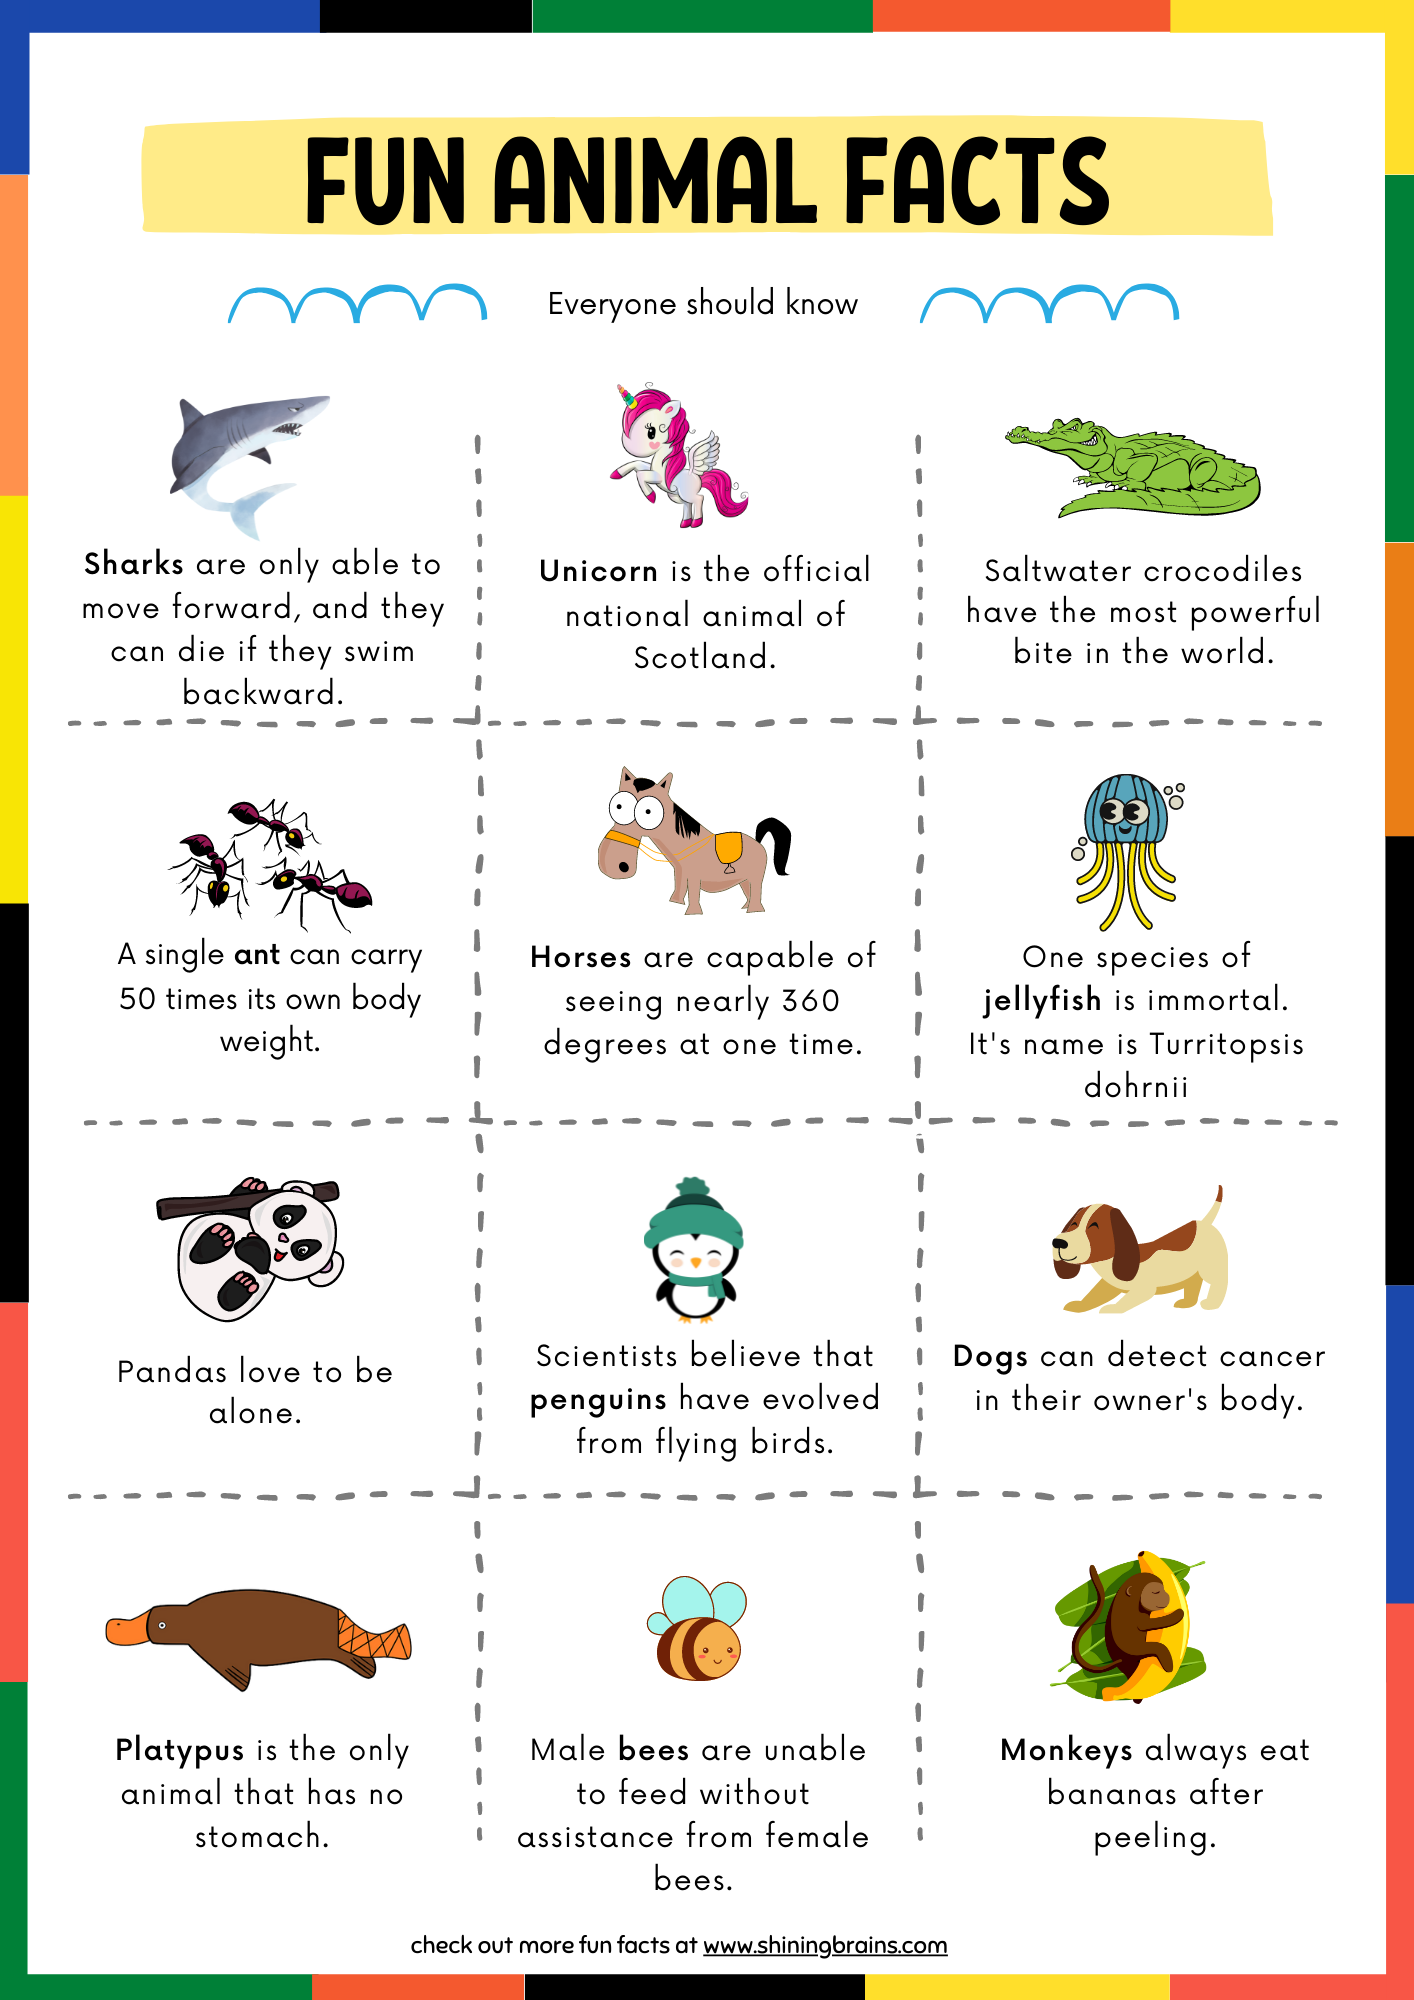 Fun Facts About Animals For Kids Free Animal Facts Printable - Riset